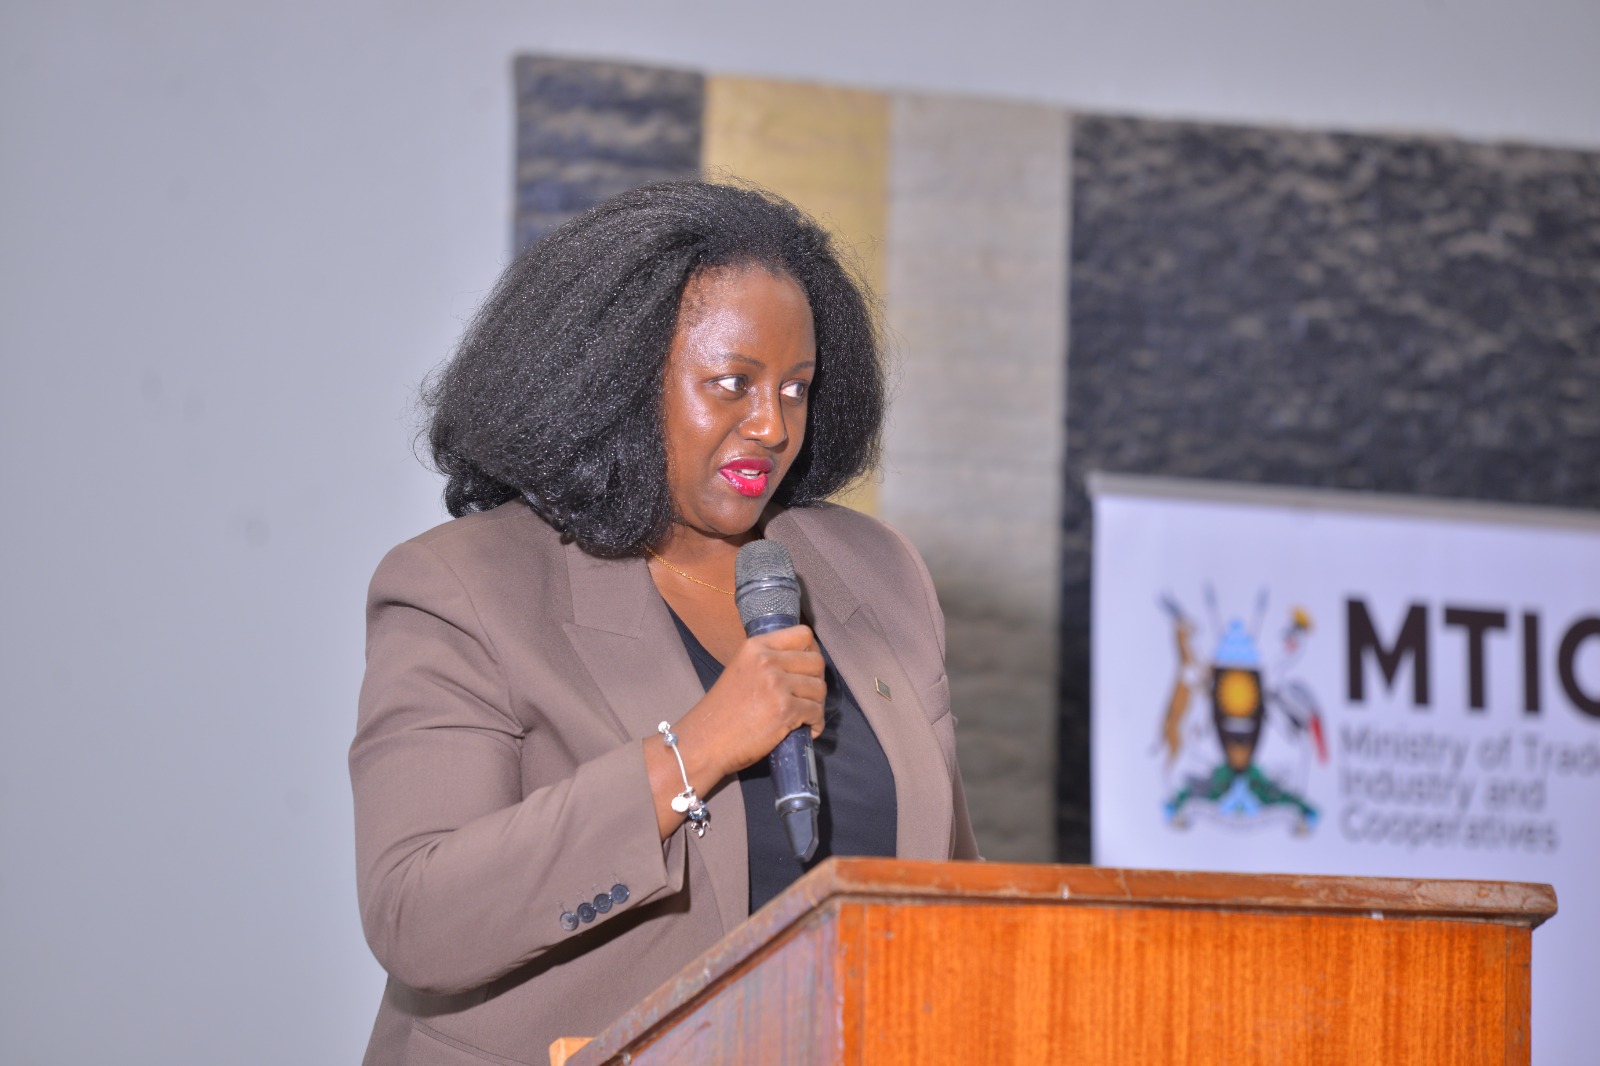 “I cant work with her”- Minister petitions Public Service over PS Geraldine Ssali’s conduct